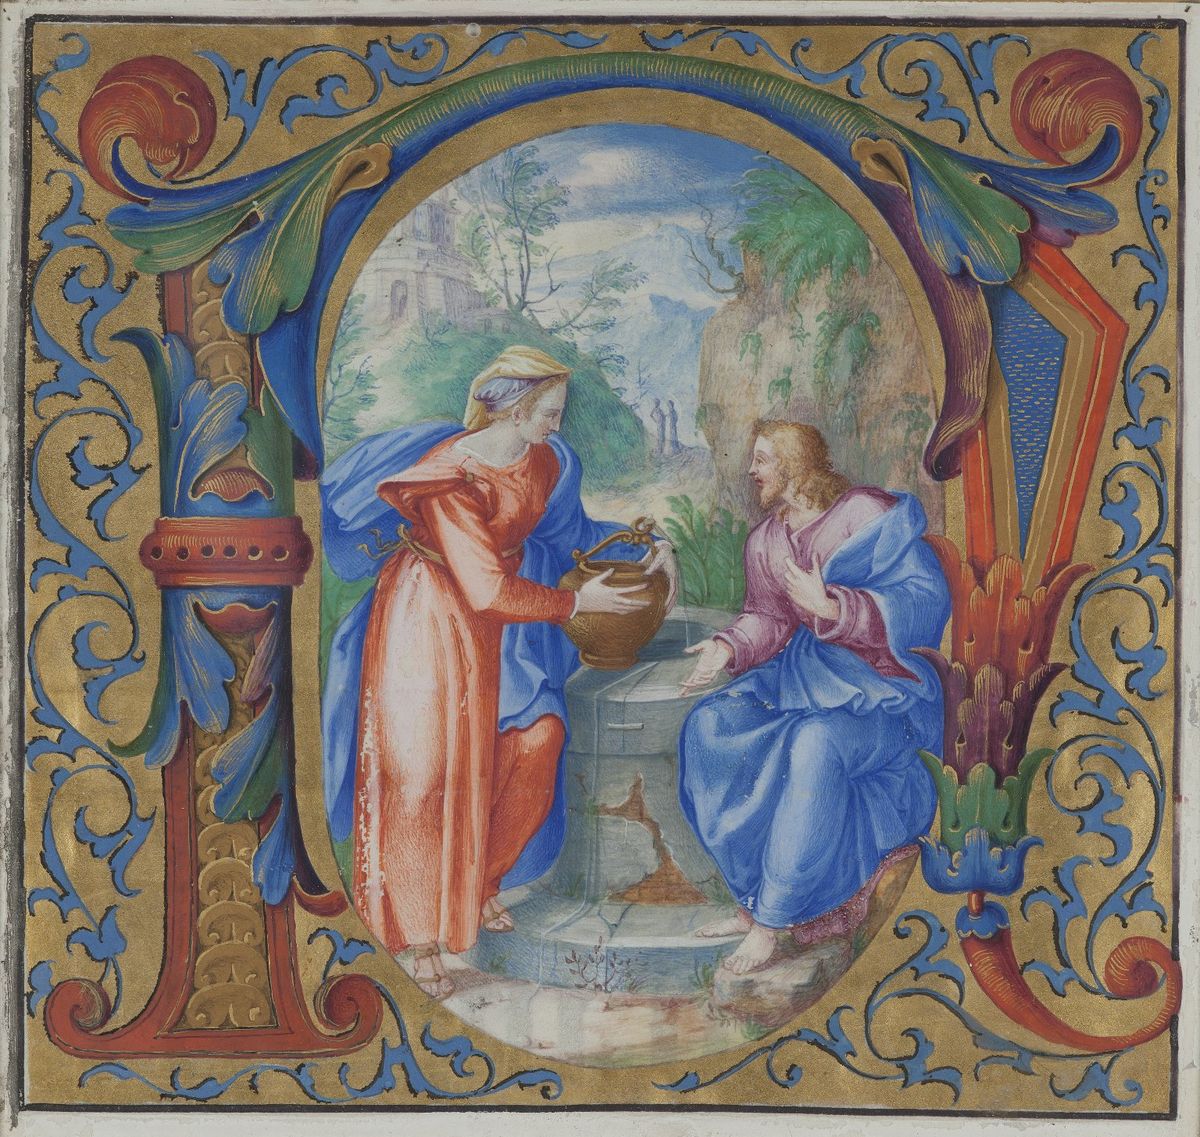 Christ and the Woman of Samaria at the Well (16th Century) - Public Domain Illuminated Manuscript